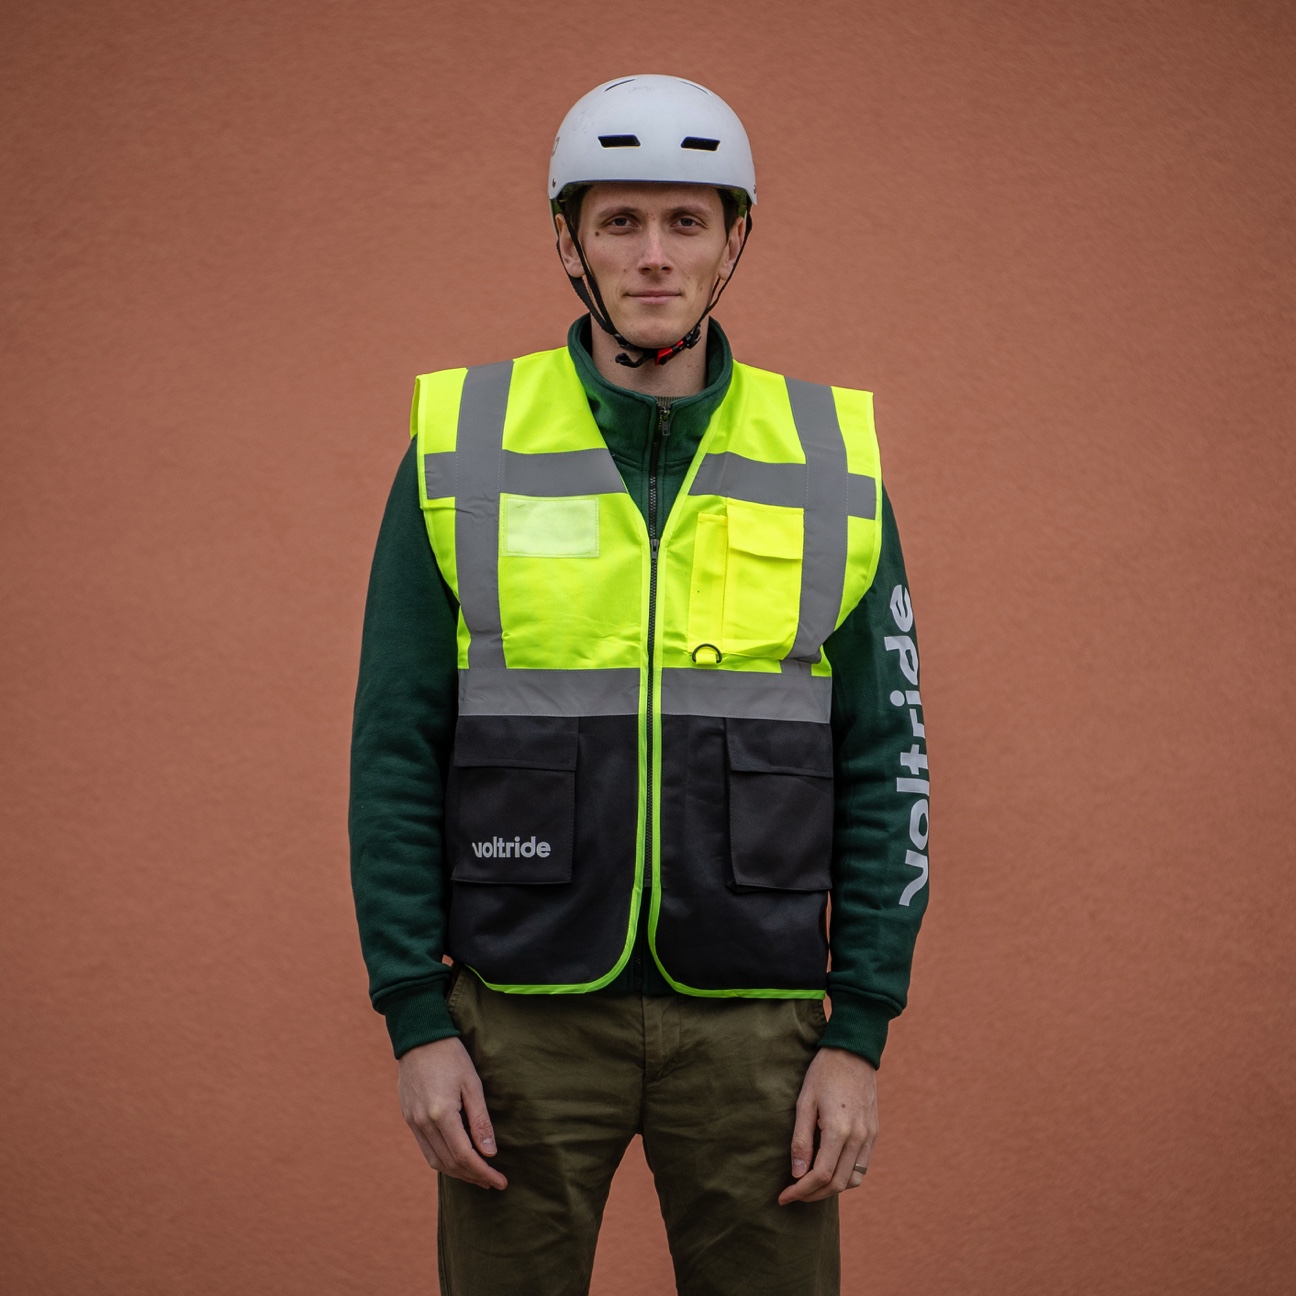 Reflective vest -, Stay safe and visible no matter the weather